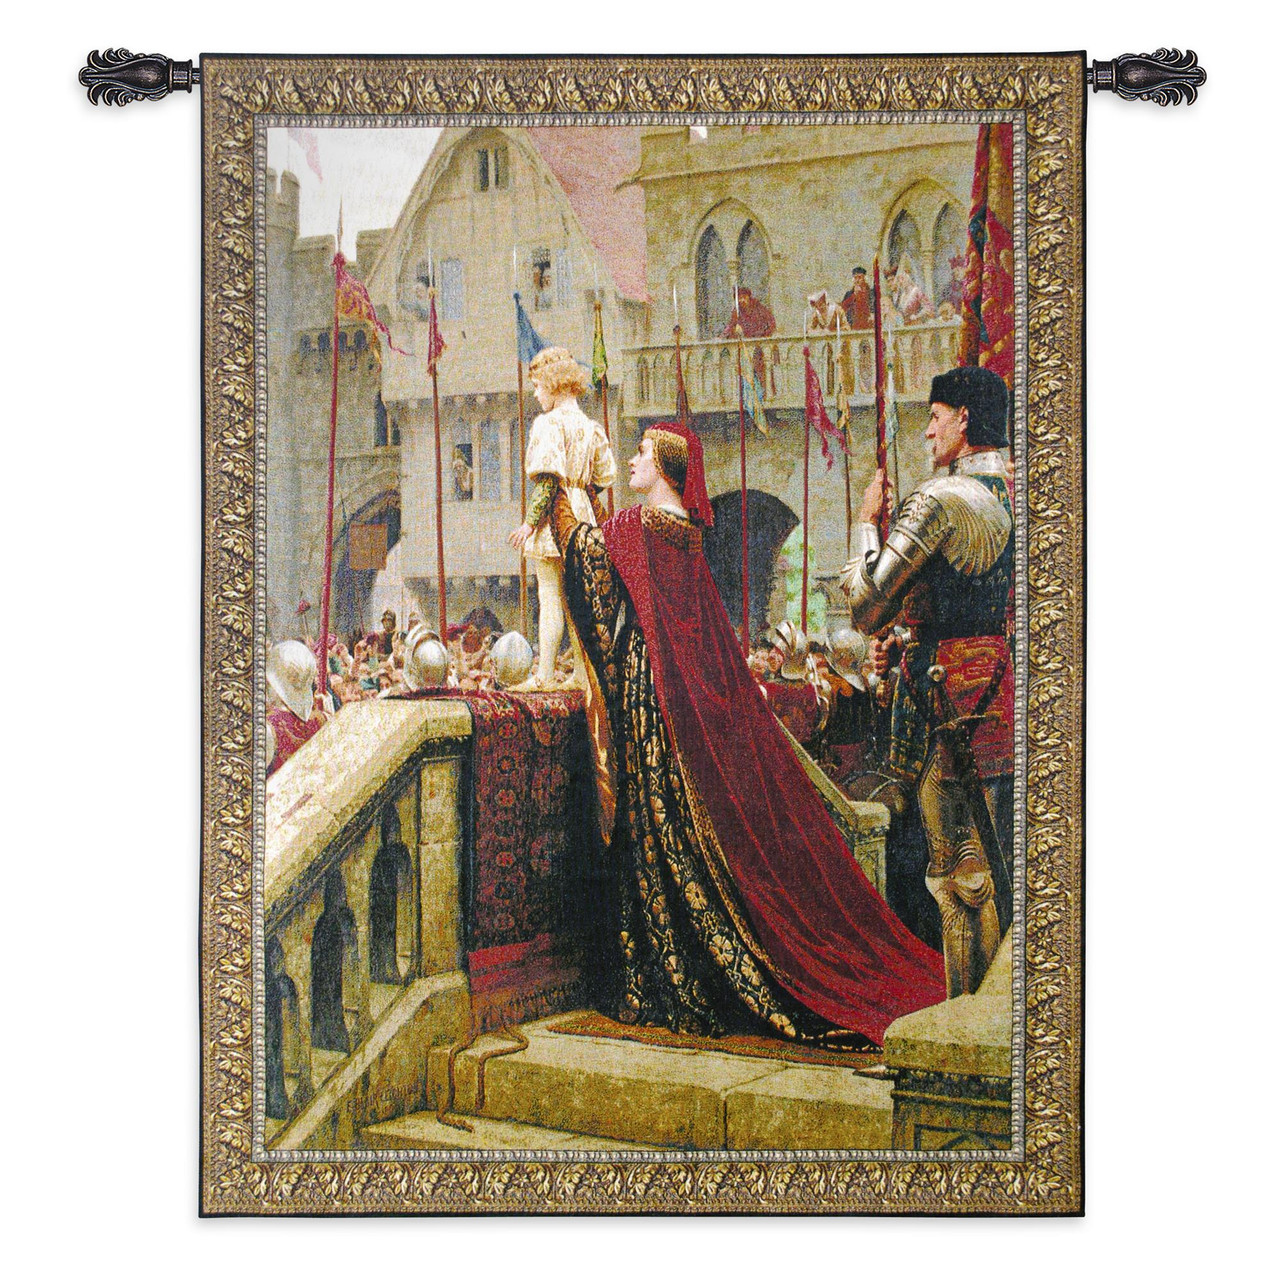 The Accolade by Edmund Blair Leighton Woven Tapestry Wall Art Hanging Medieval Knight Ceremony 100% Cotton USA Size 53x42 - 1